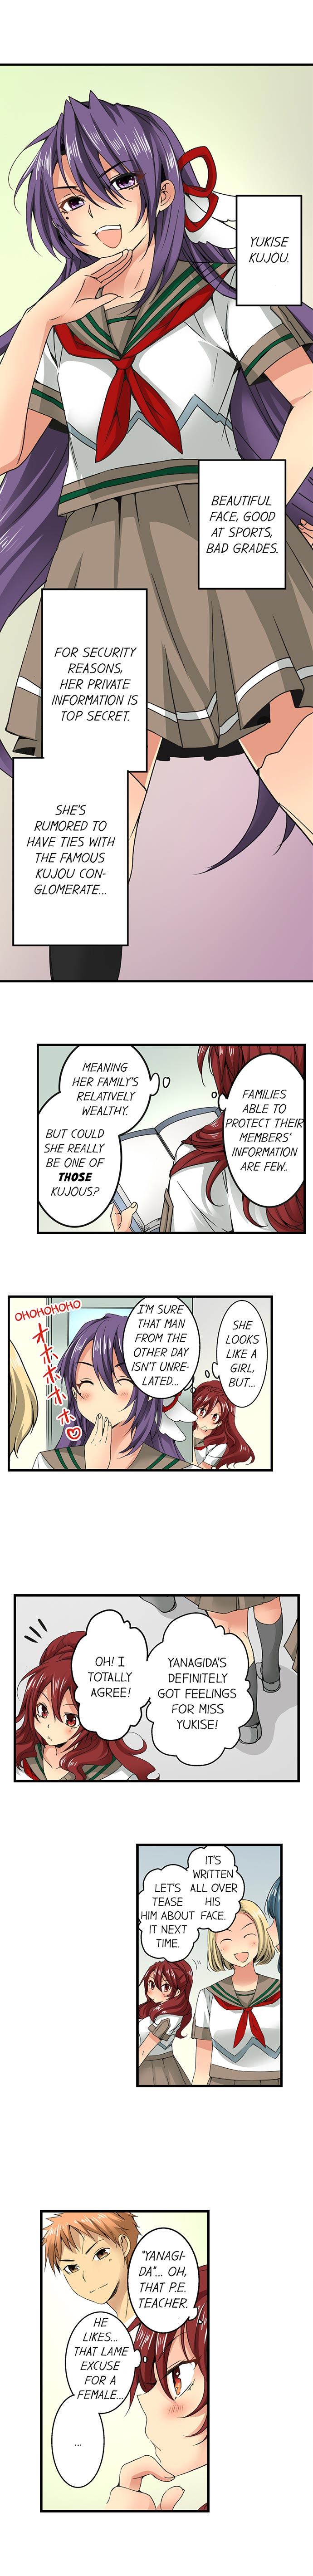 Sneaked Into A Horny Girls’ School - Chapter 19 Page 2